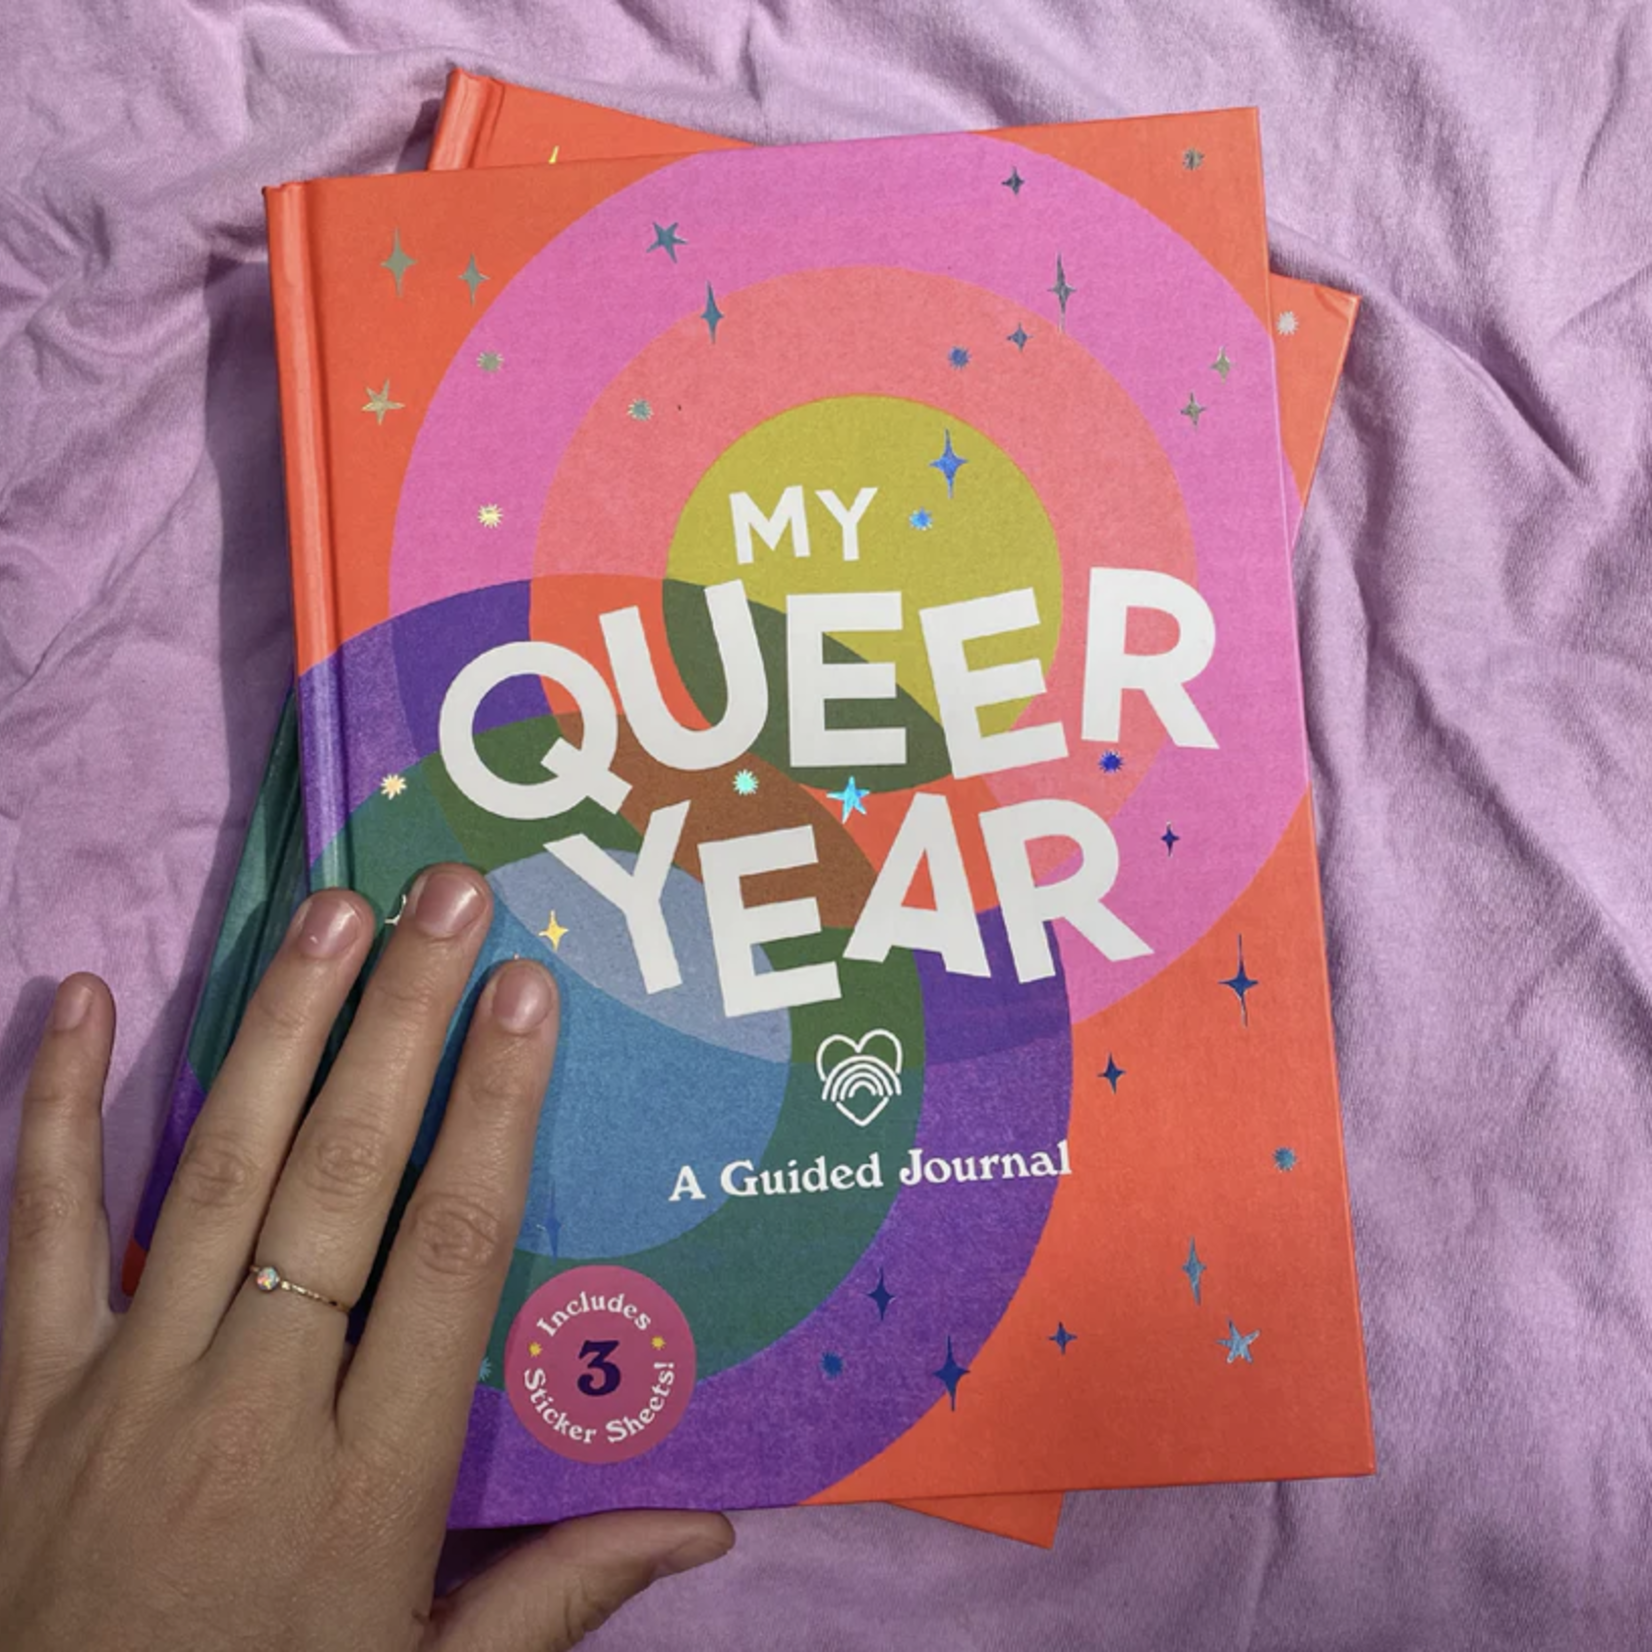 My Queer Year: a guided journal by Ash + Chess